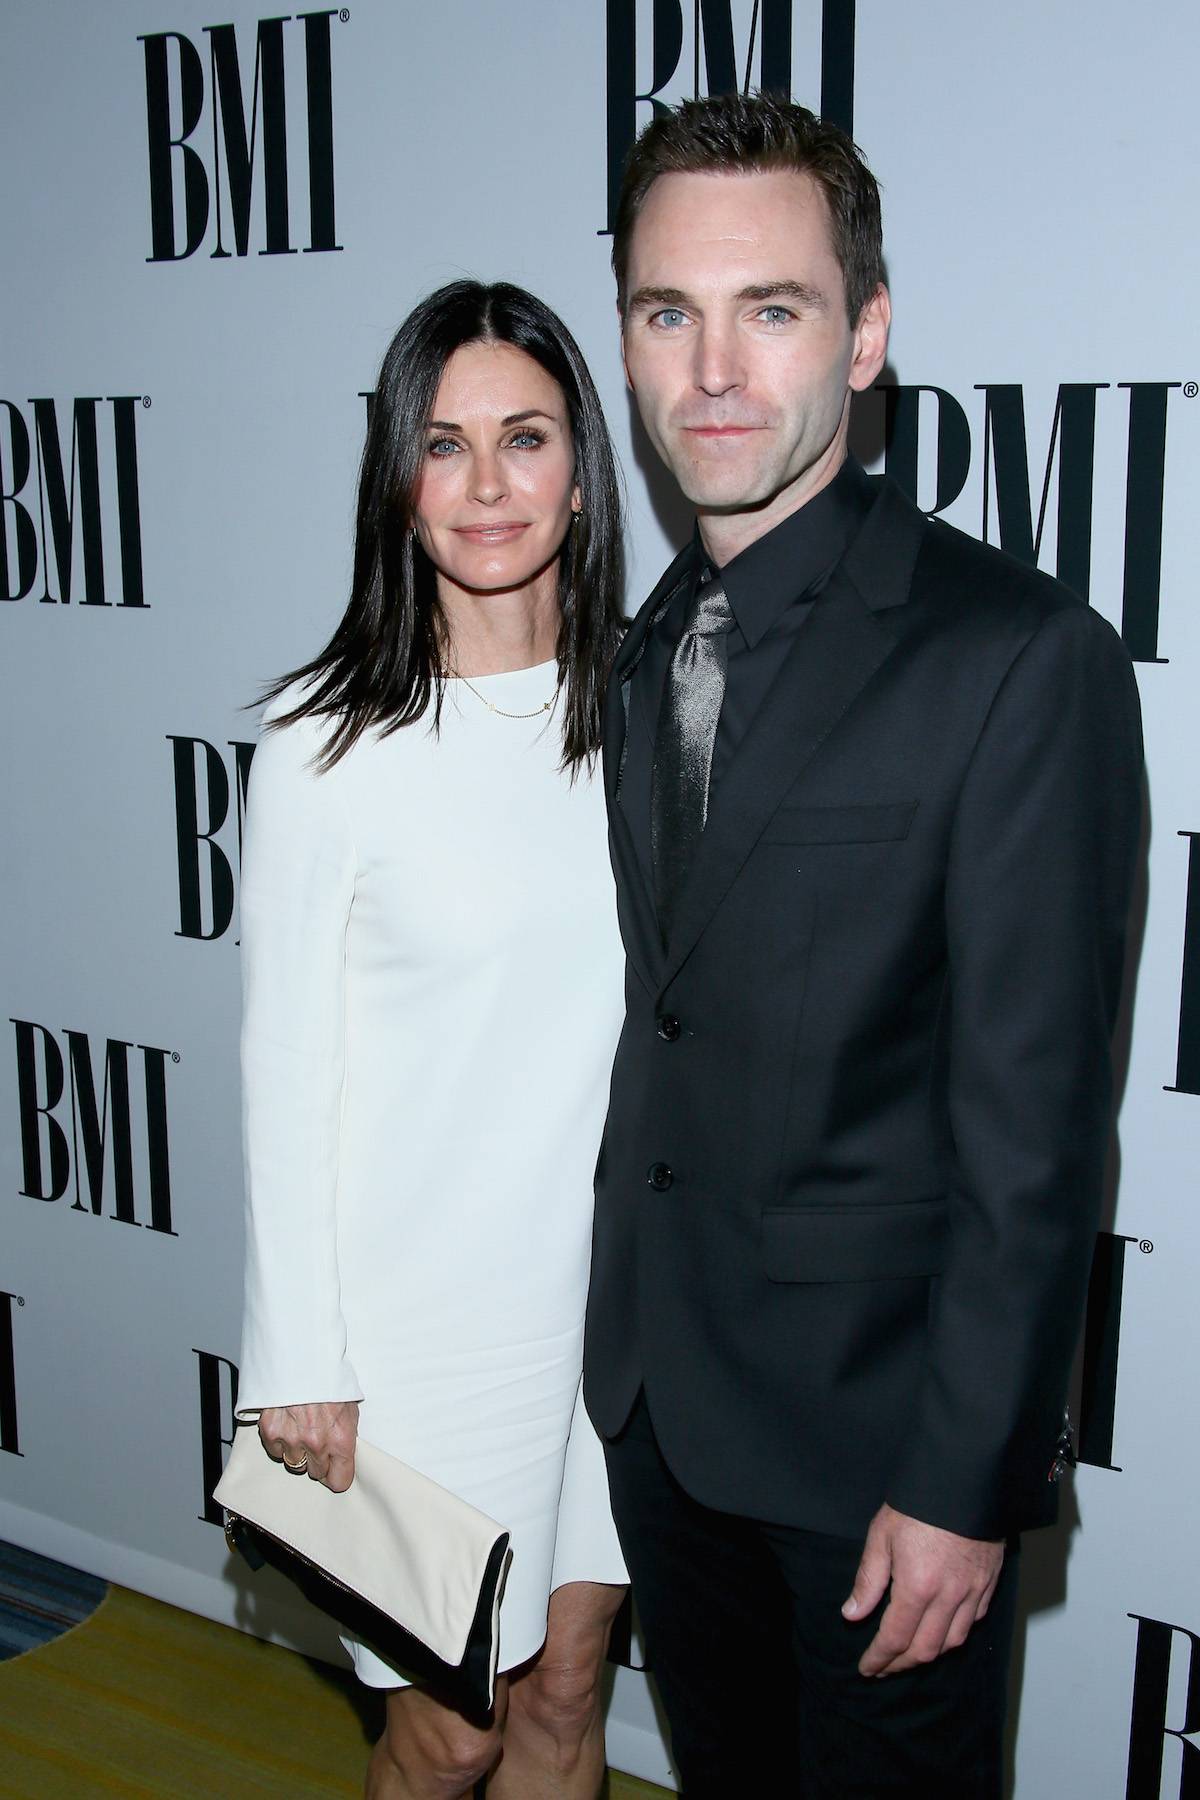 Courteney Cox i Johnny McDaid (Fot. Getty Images)